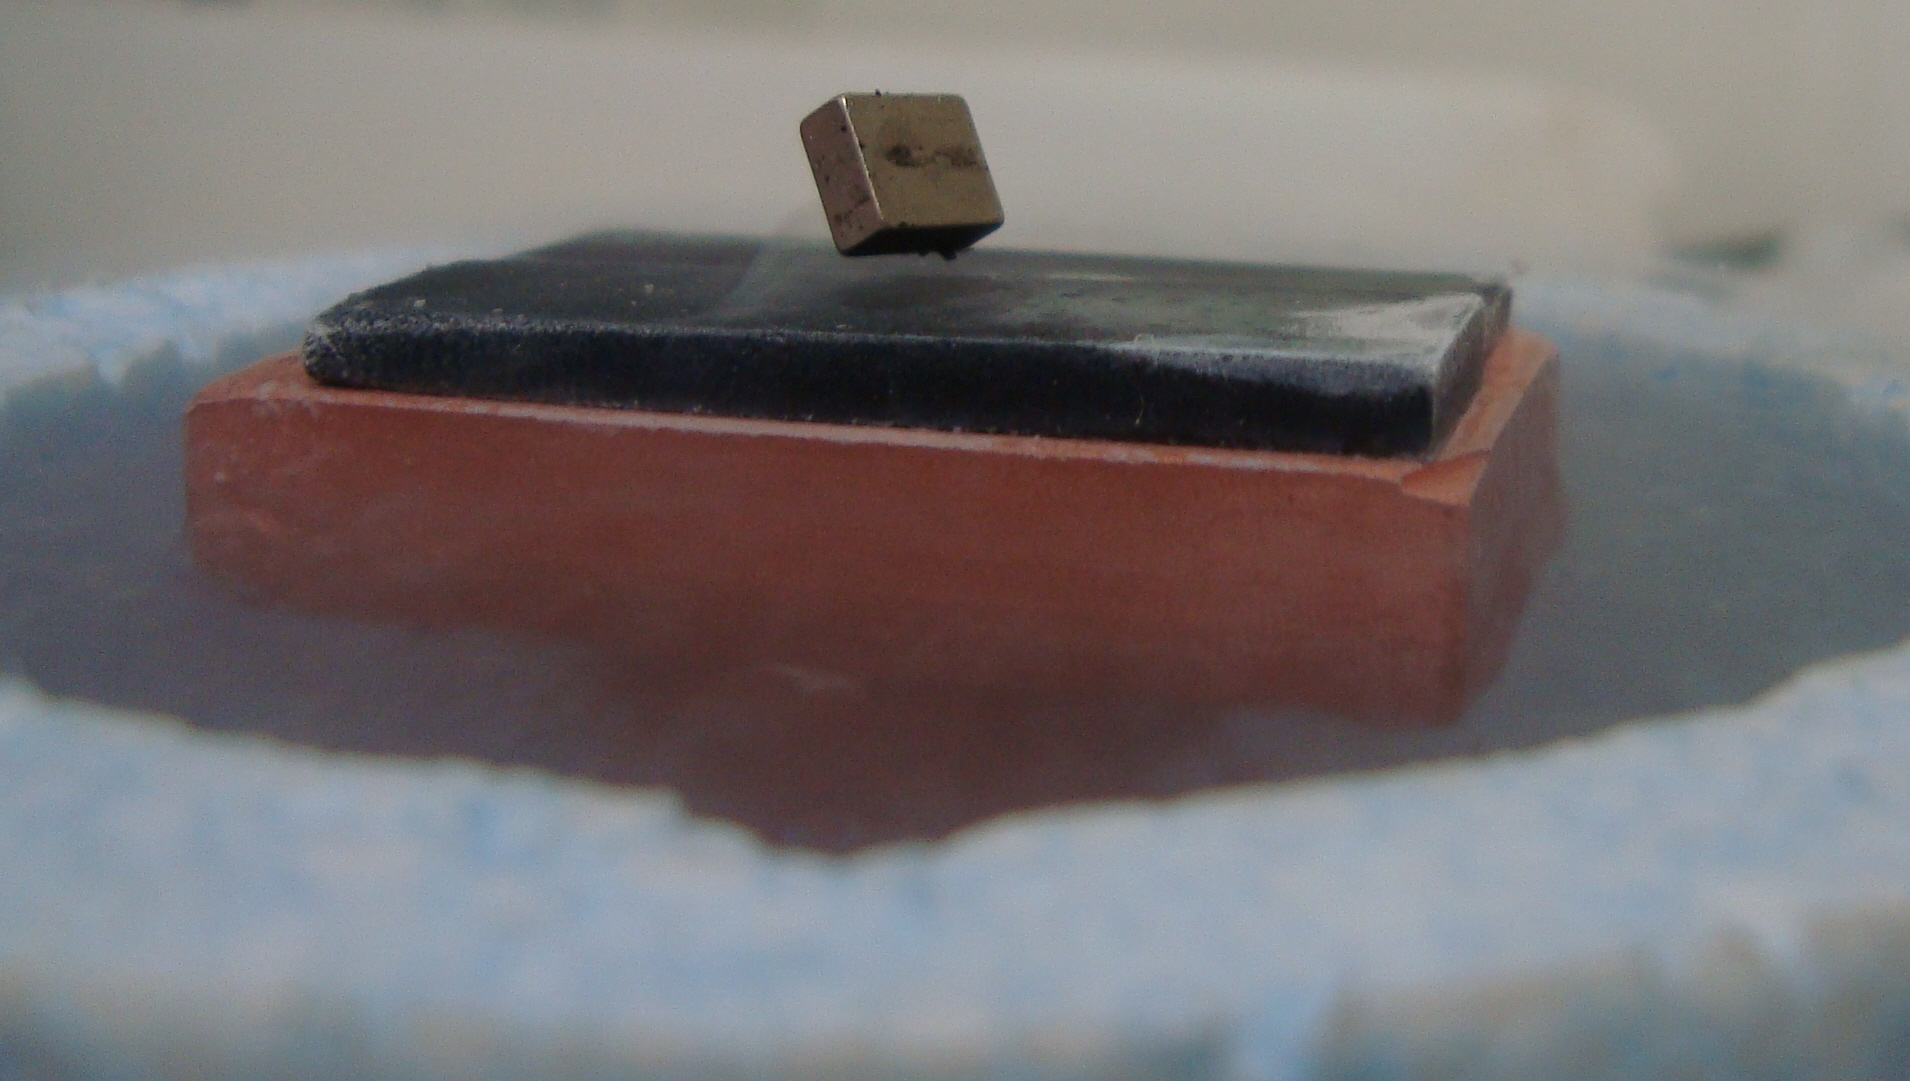 Magnetic levitation with superconductor pellets